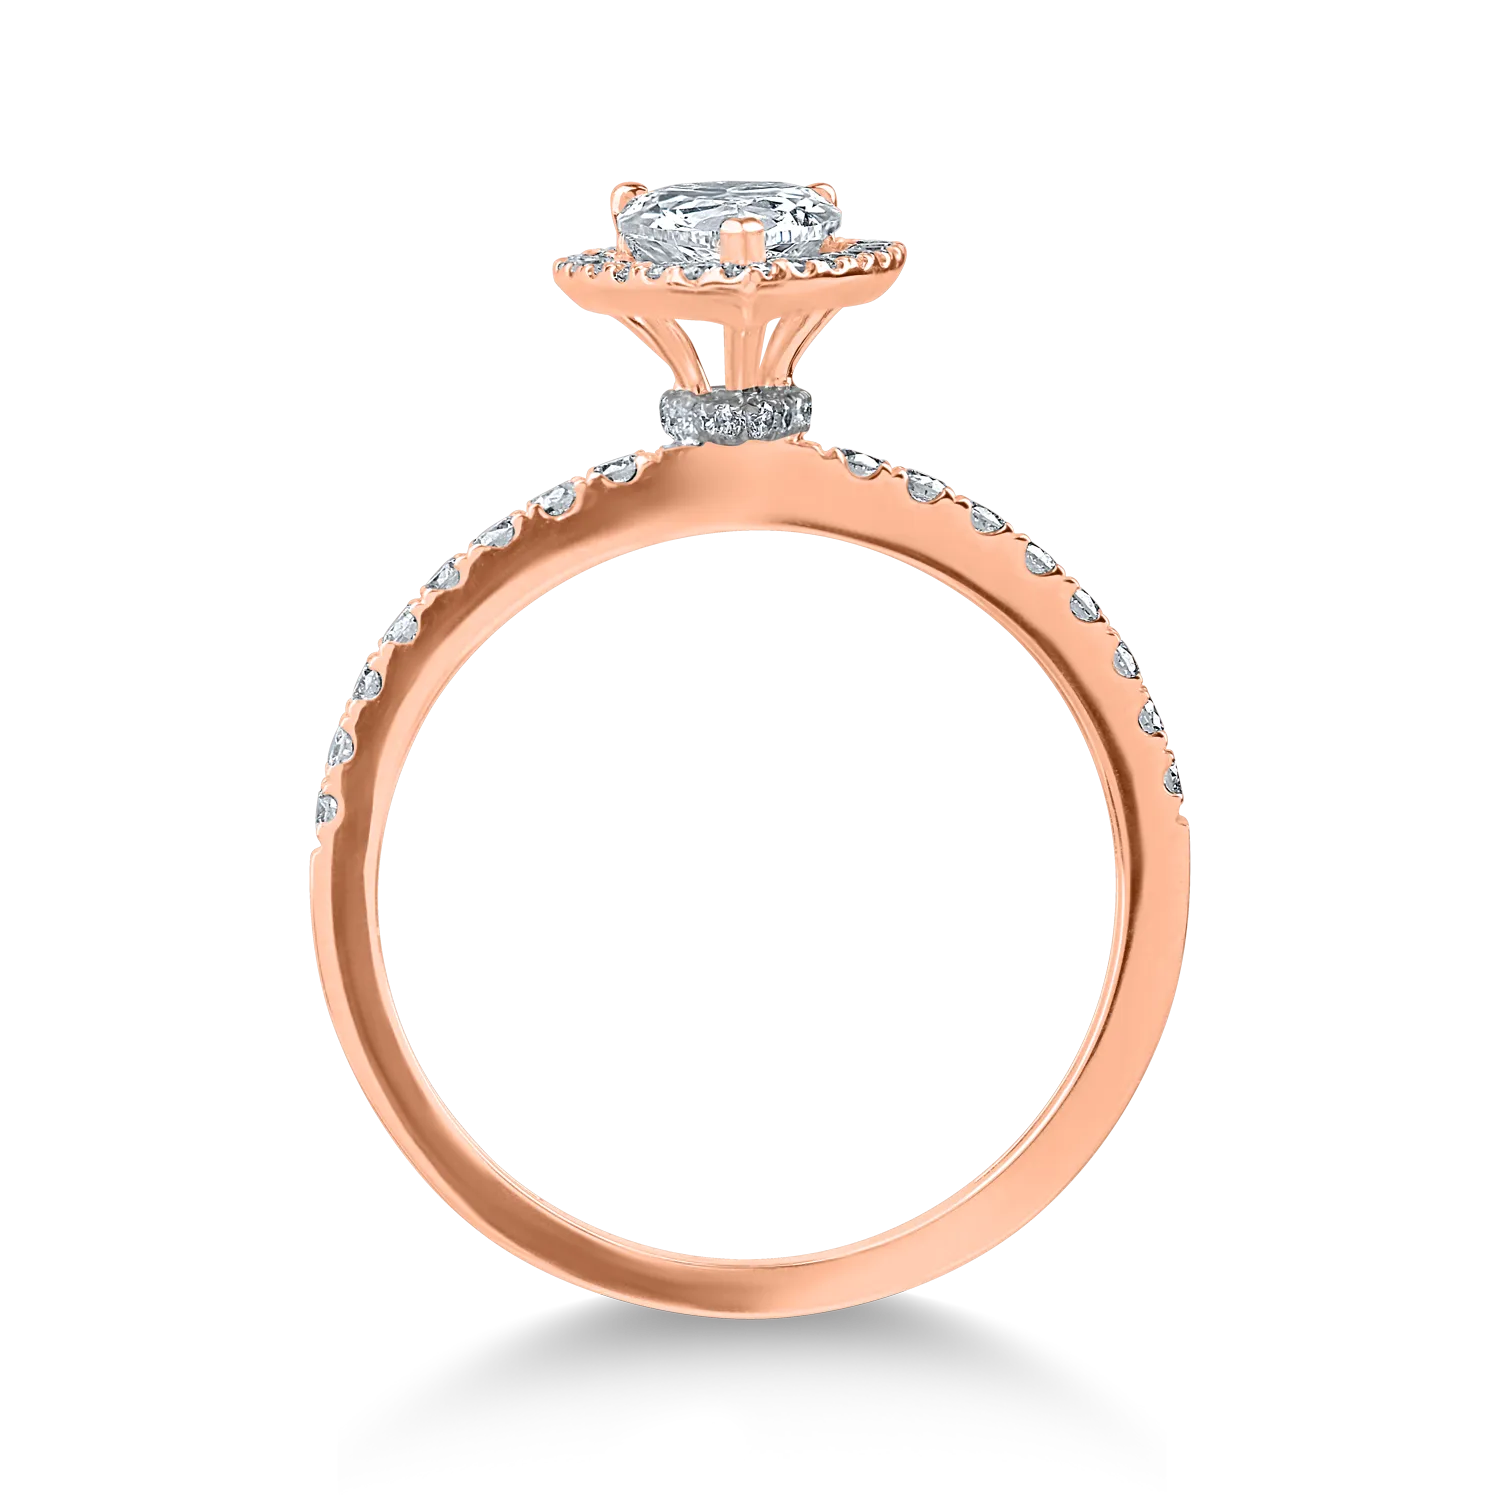 Rose gold engagement ring with 0.8ct diamond and 0.3ct diamonds